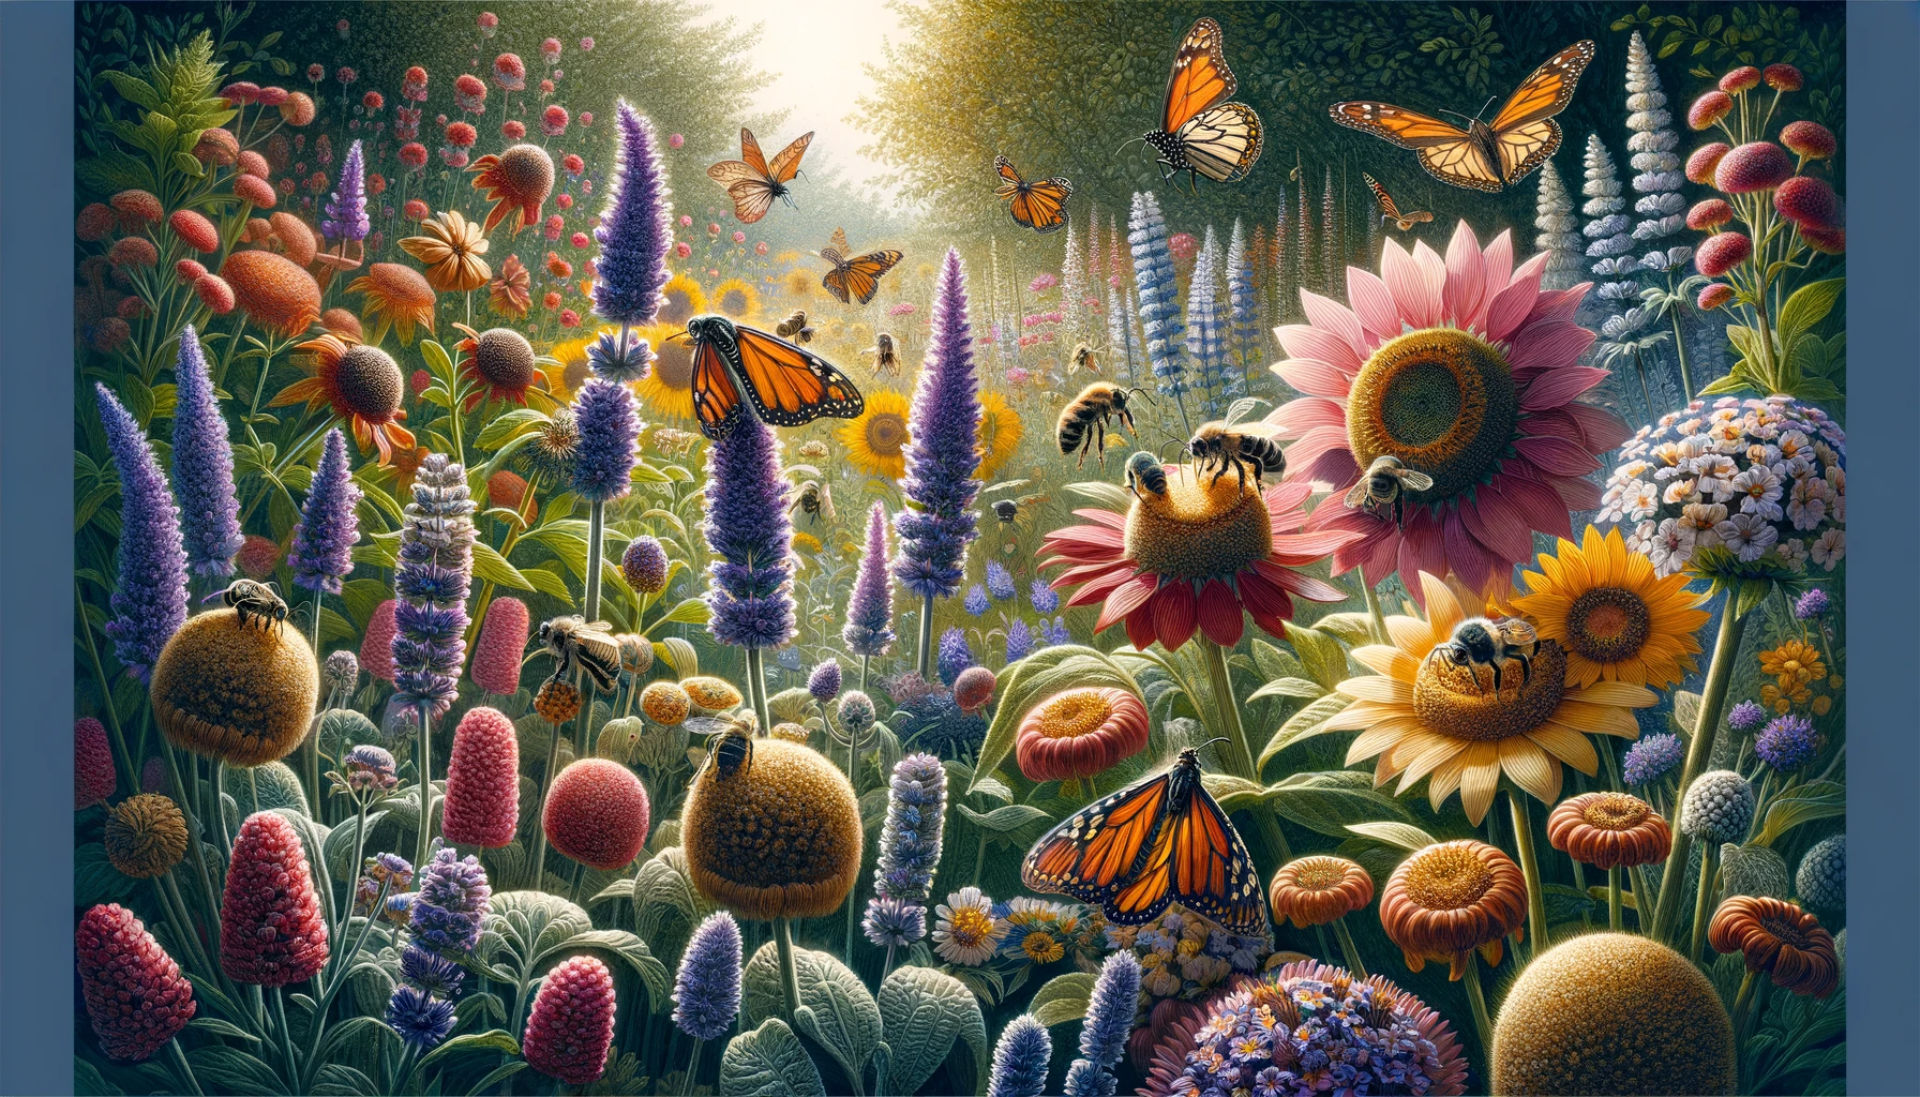 An image depicting 'Improved Pollination' in a companion planting garden. Illustrate a variety of flowering plants, such as lavender and sunflowers, attracting bees and butterflies. The scene should be vibrant and alive with pollinator activity, emphasizing the role of these insects in the garden's health. Show bees and butterflies moving from flower to flower, highlighting the critical process of pollination. The overall atmosphere should be one of a bustling, lively garden, with a focus on the symbiotic relationship between plants and their pollinators.